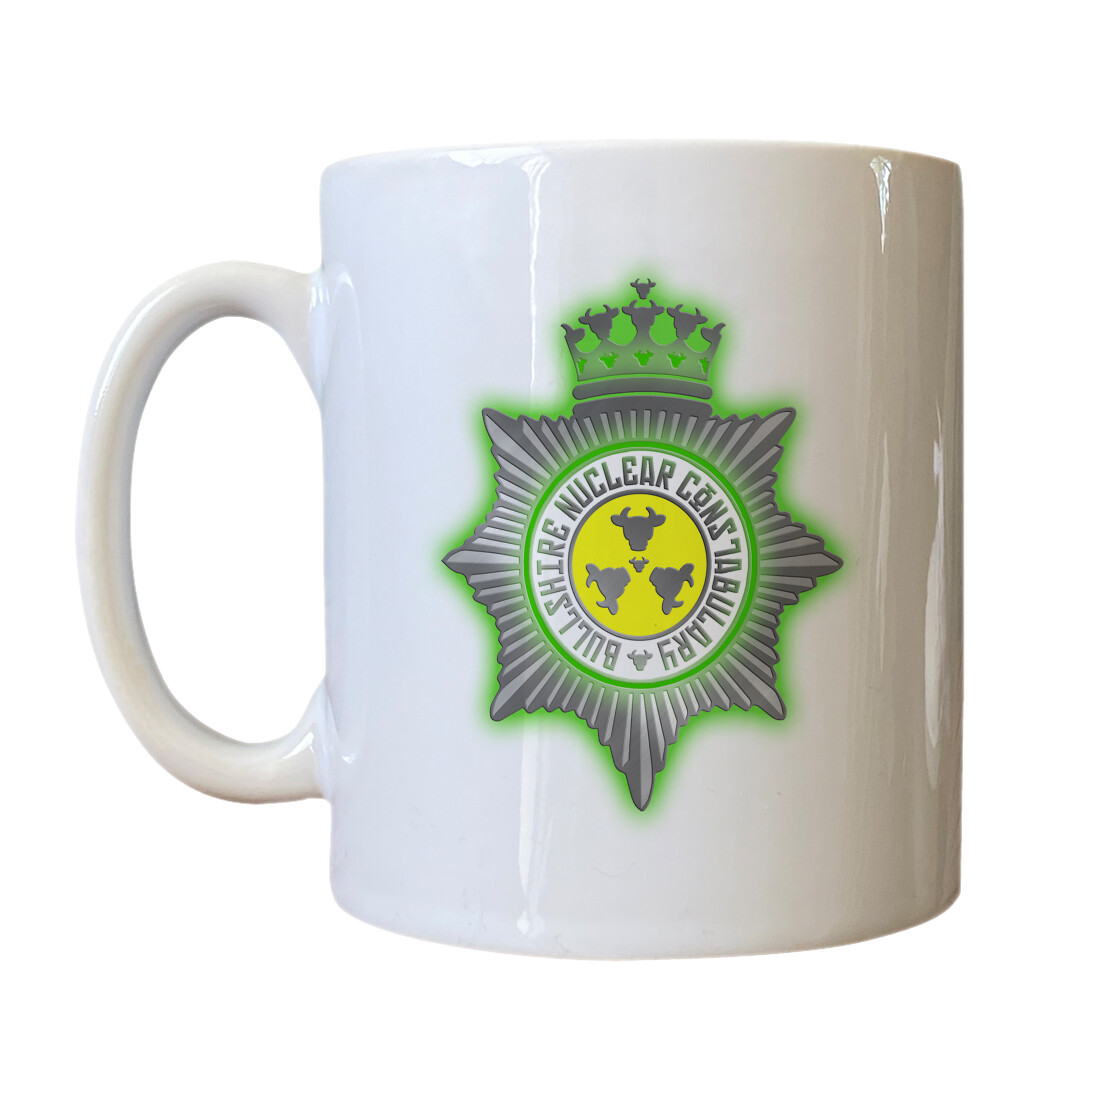 Personalised 'Bullshire Nuclear Constabulary' Drinking Vessel